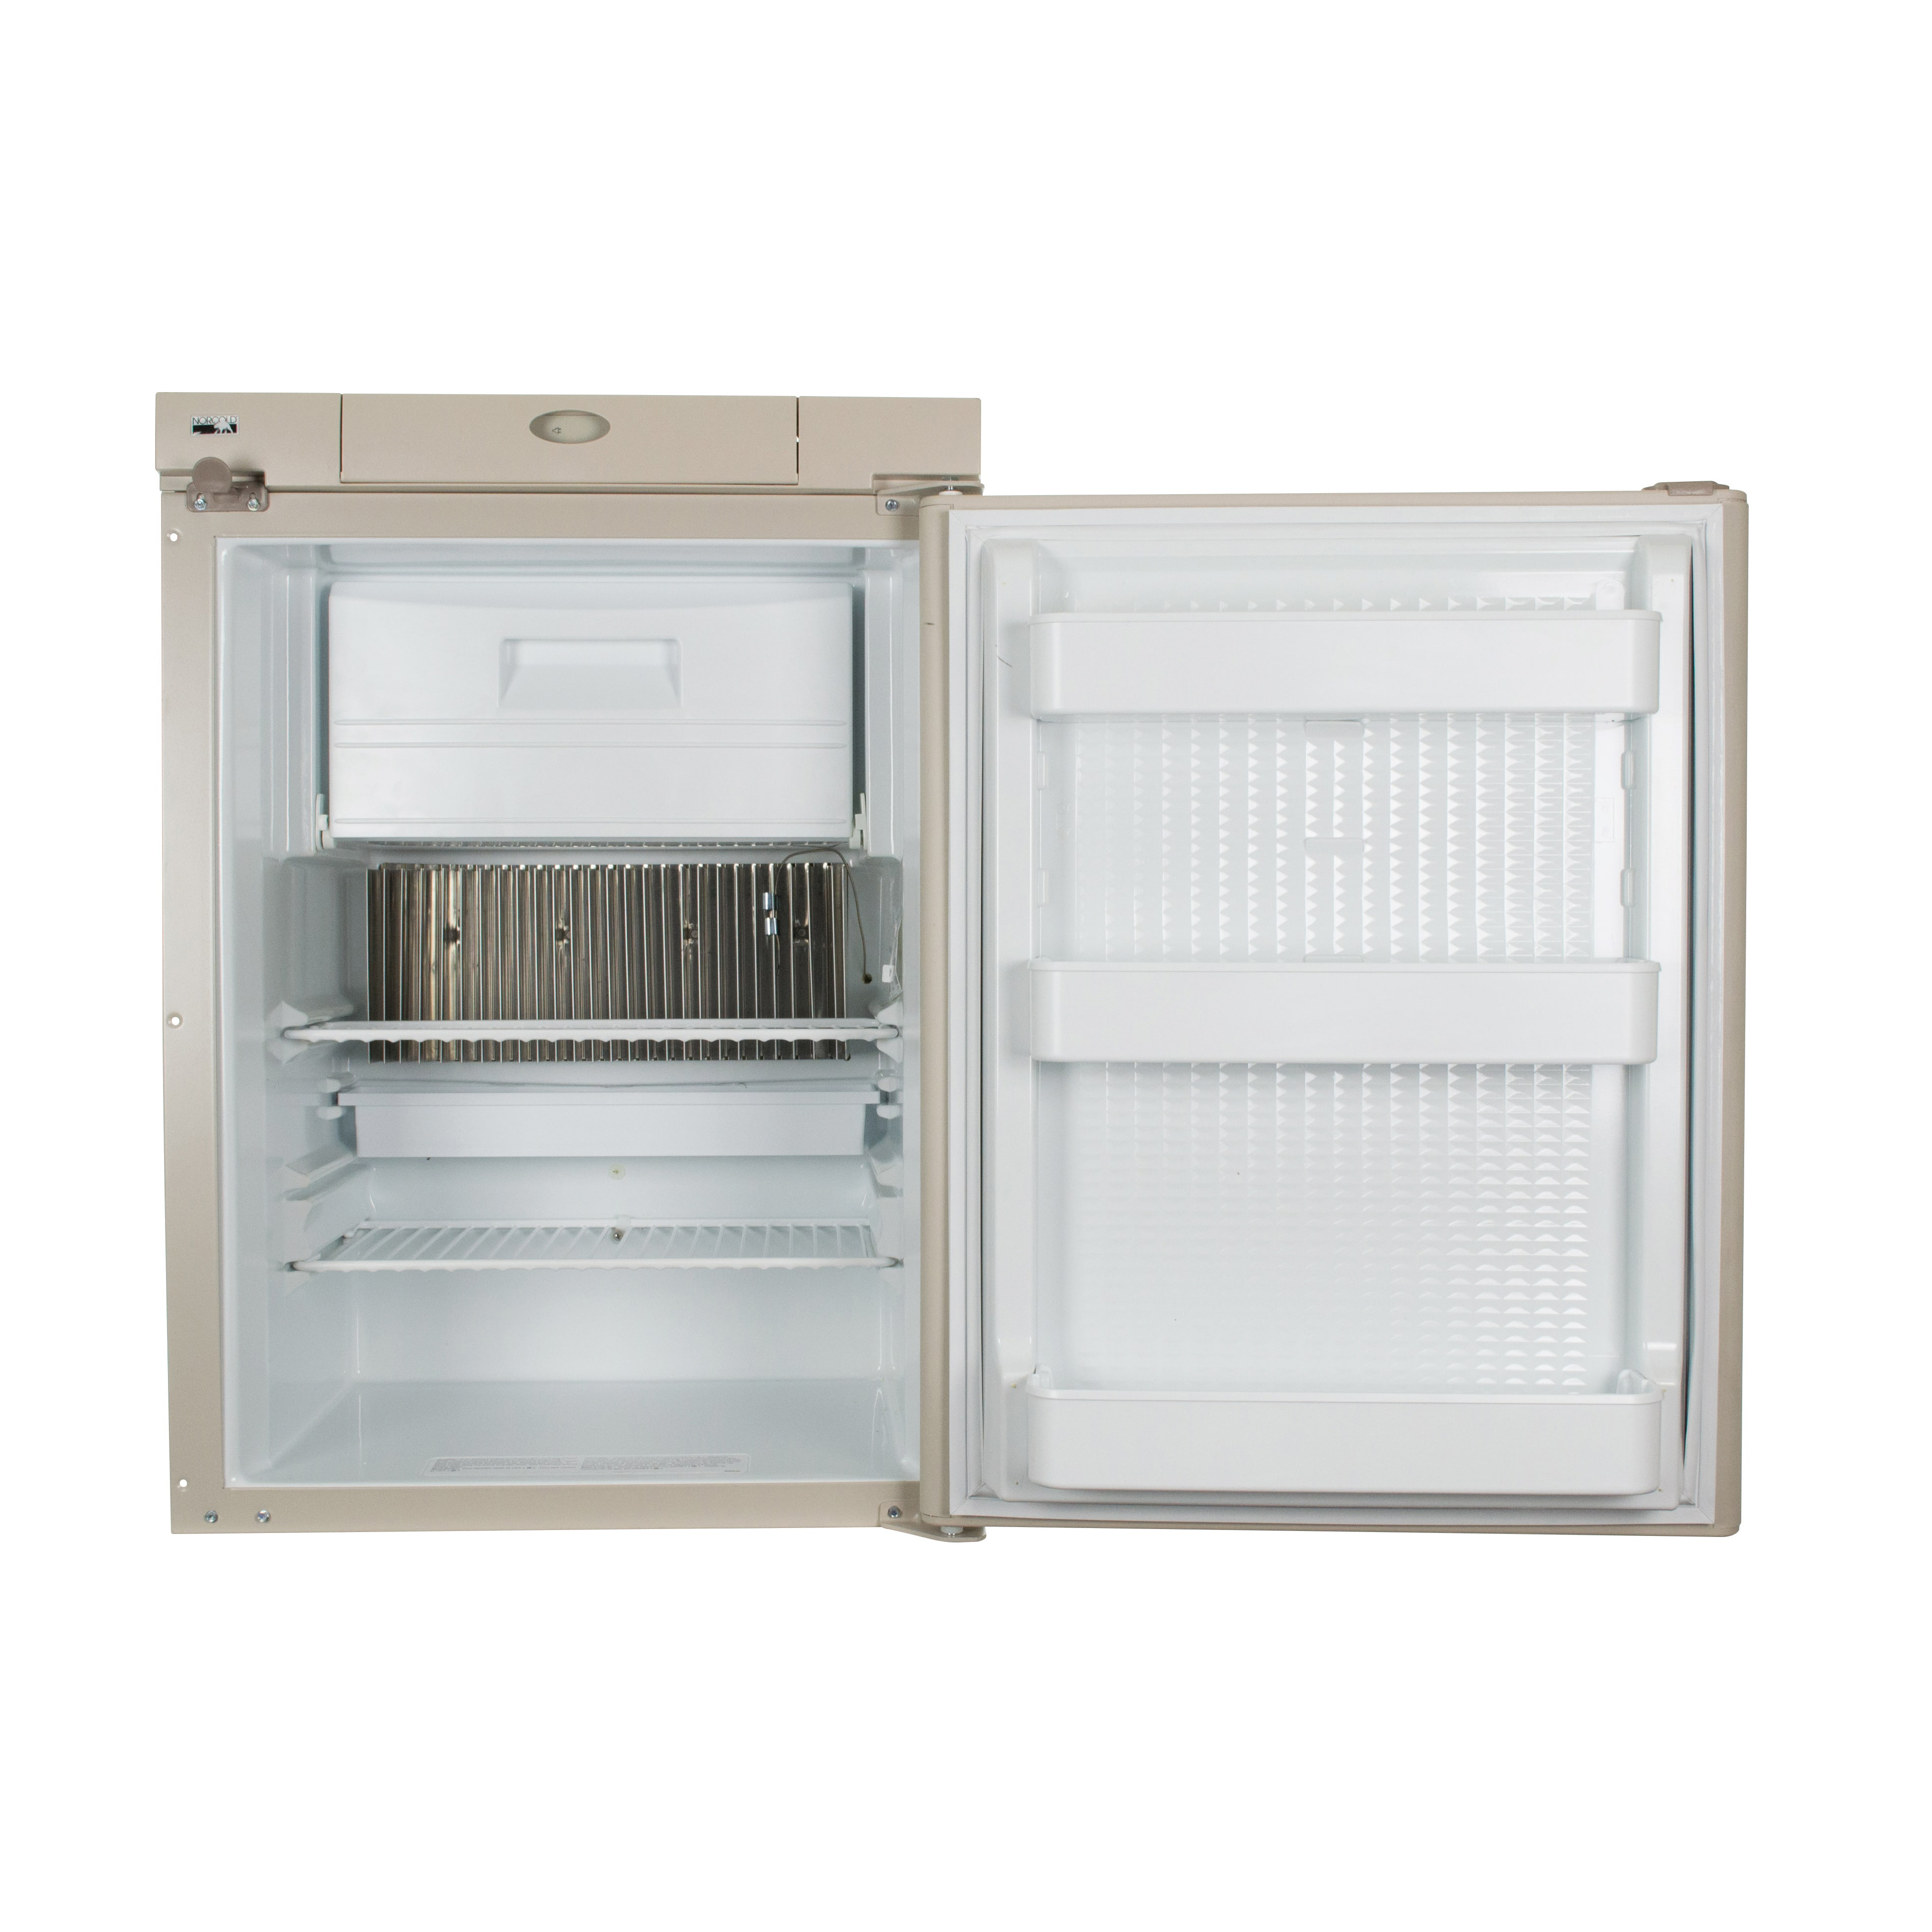 Norcold N305/ N306 - Refrigerator and freezer in a 2.5 cubic-foot unit